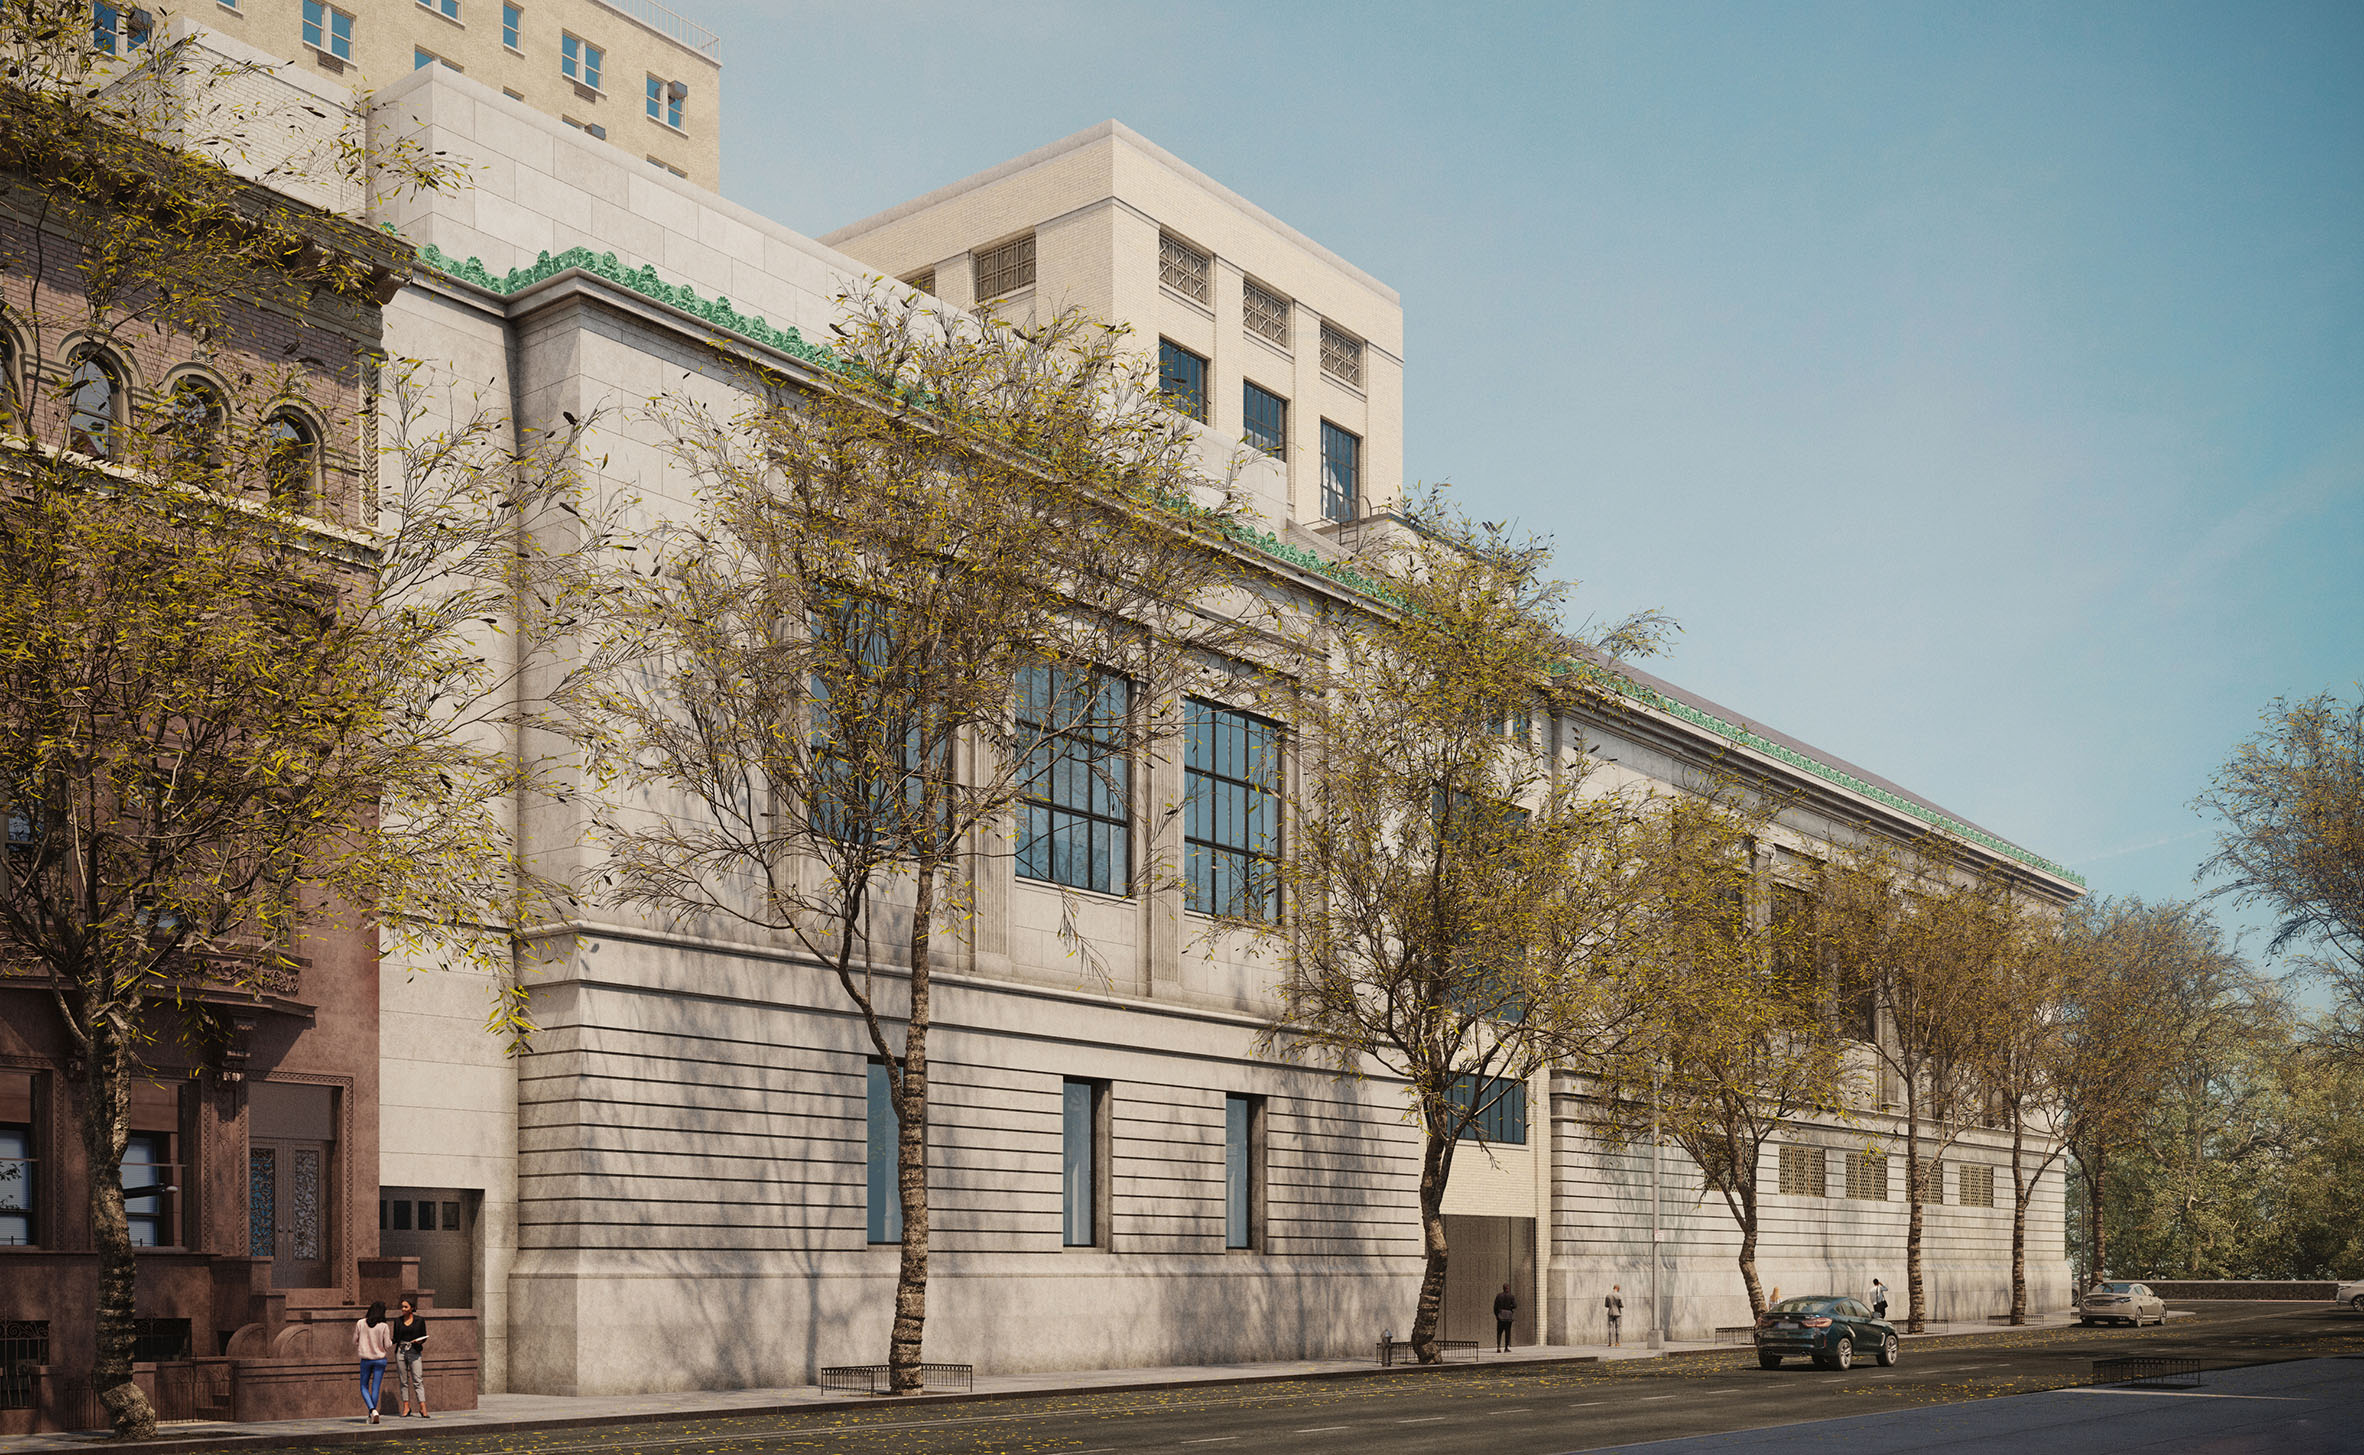 New-York Historical Society expansion from West 76th Street